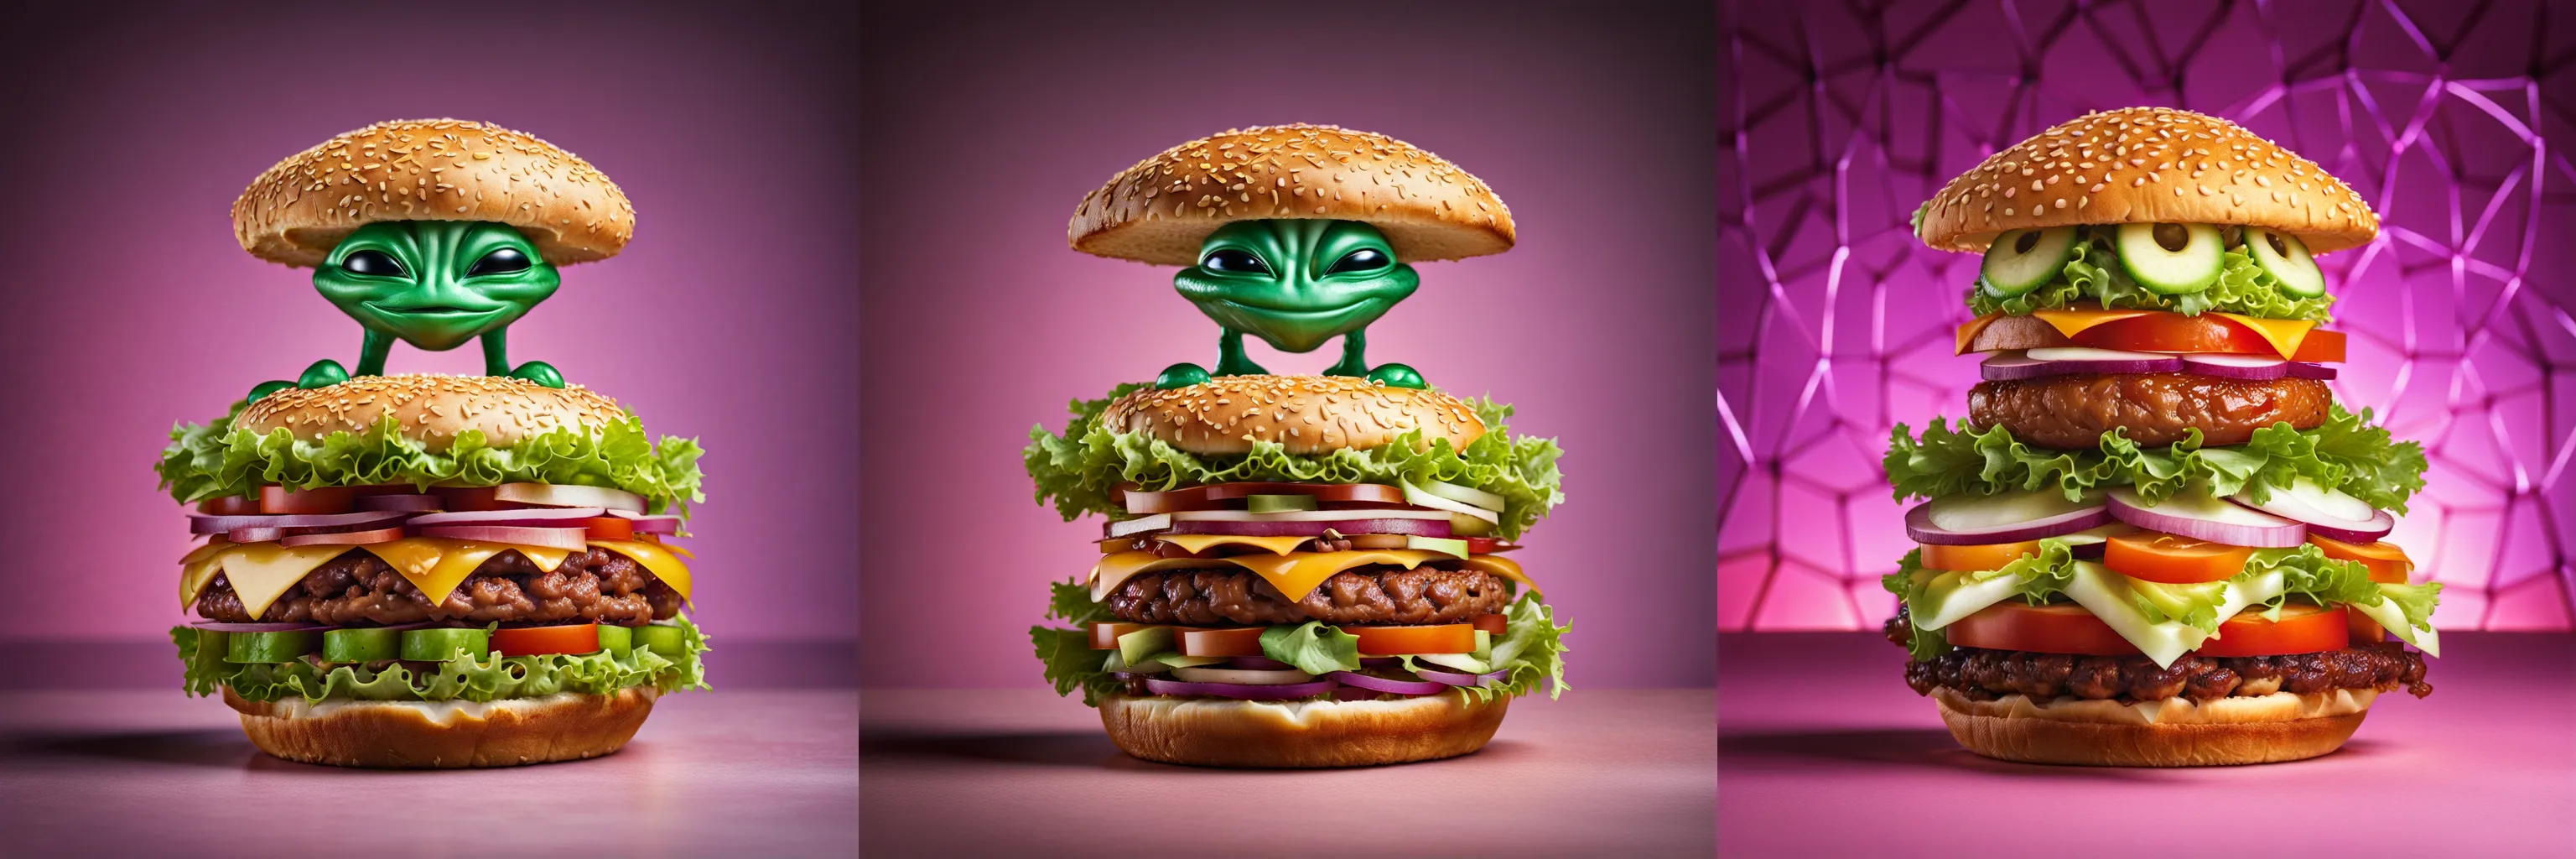 a large delicious hamburger (in the shape of five-dimensional alien geometry)++++, professional food photography